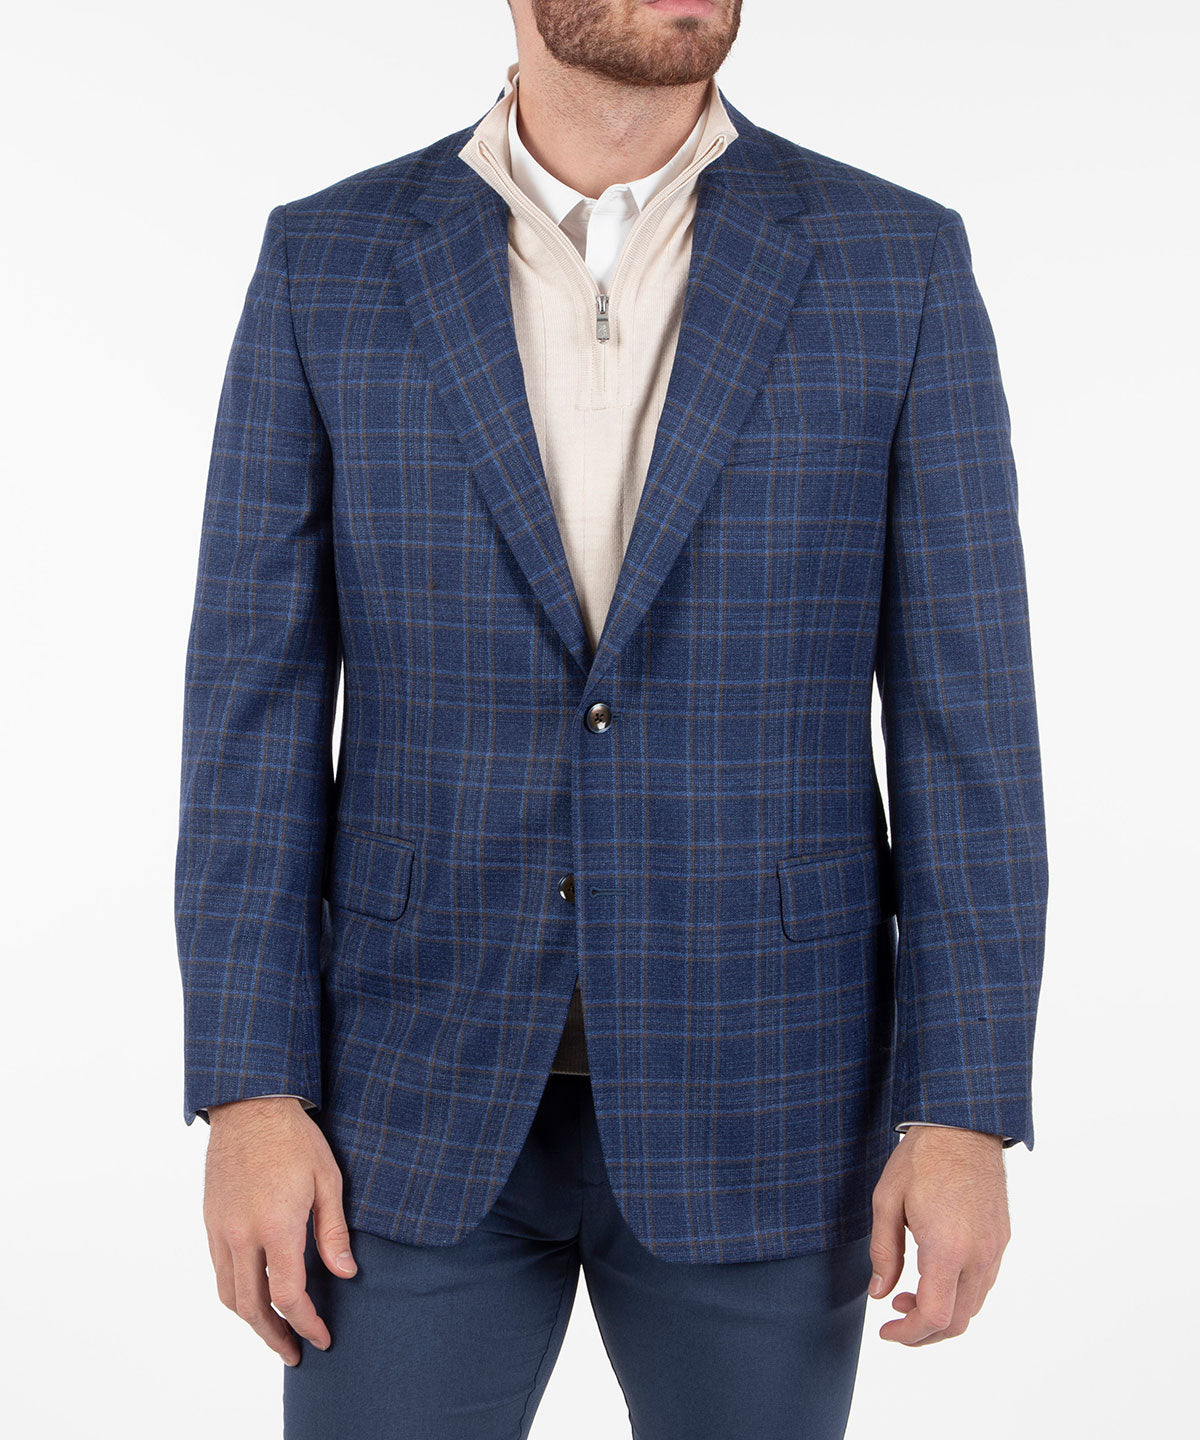 Best Sport Coat With Jeans - VSTYLE for Men